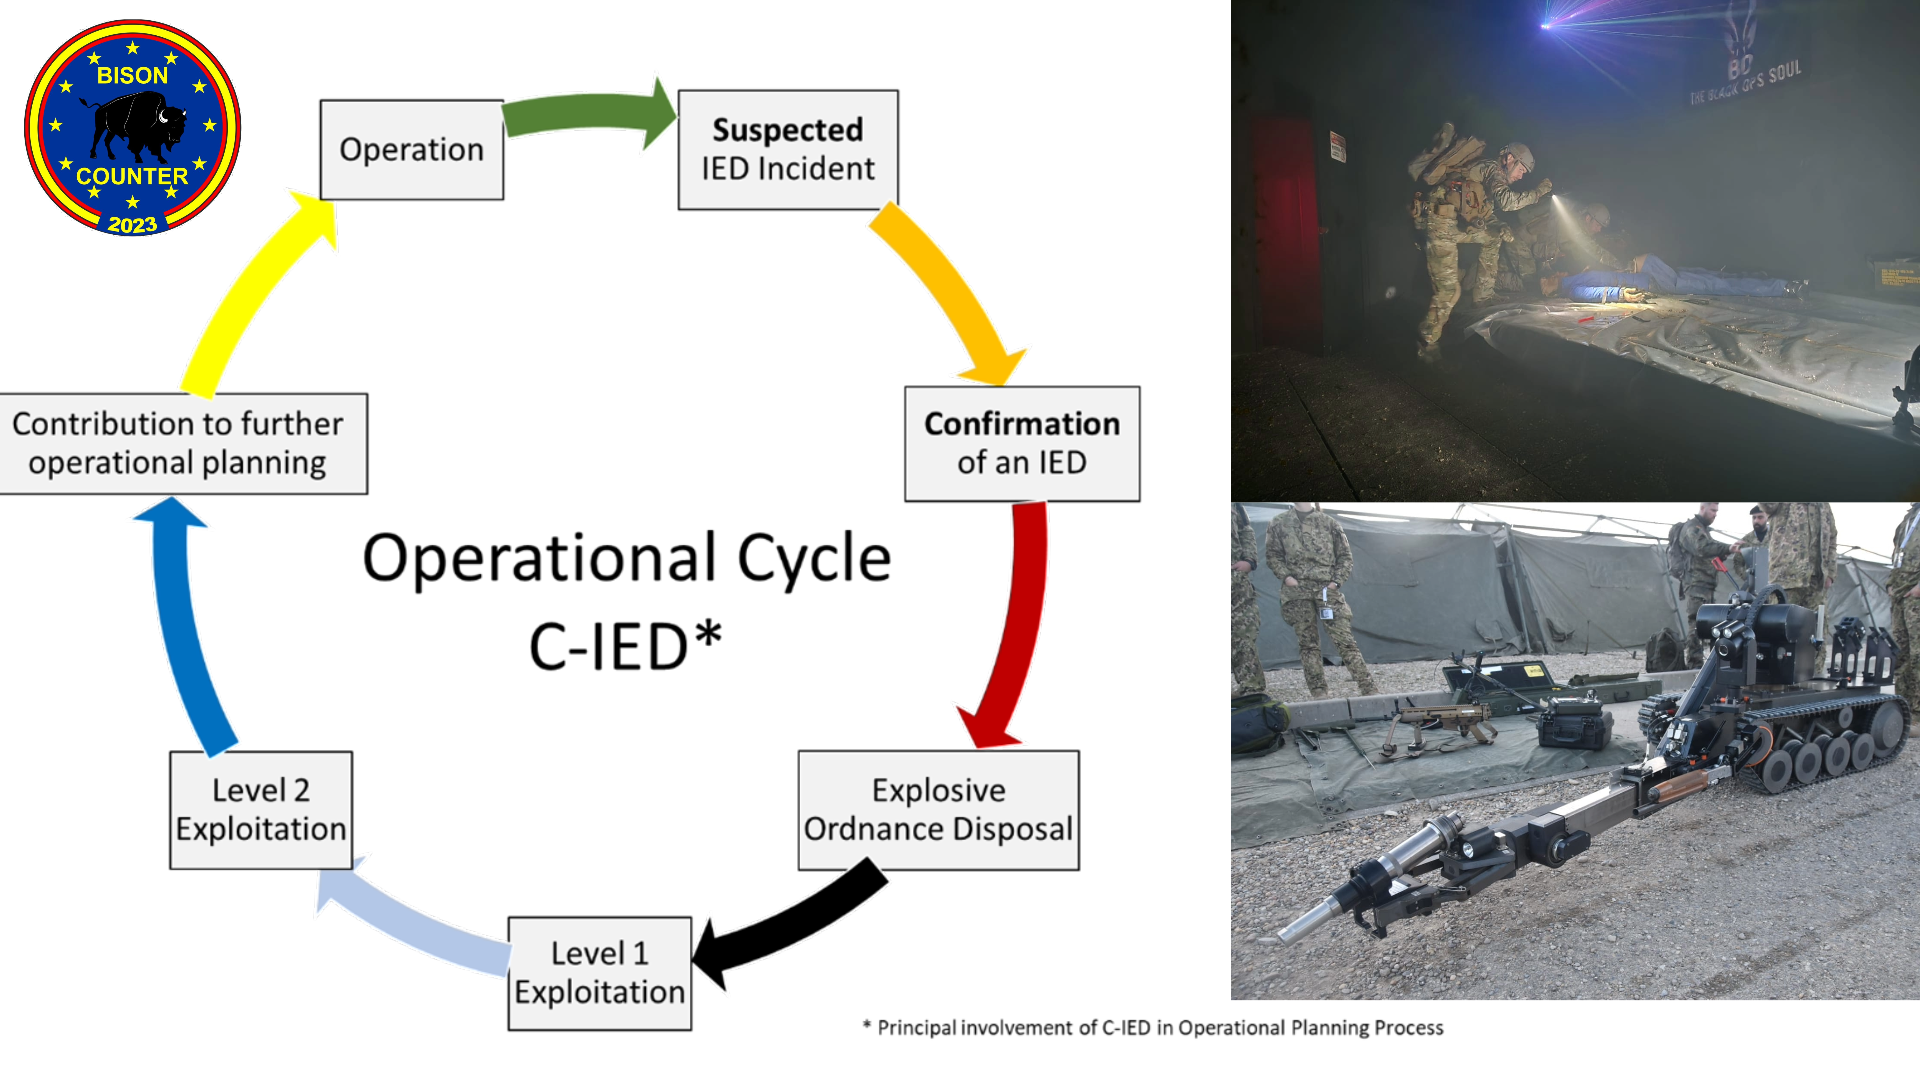 Principal involvement of C-IED in the Operational Planning Process